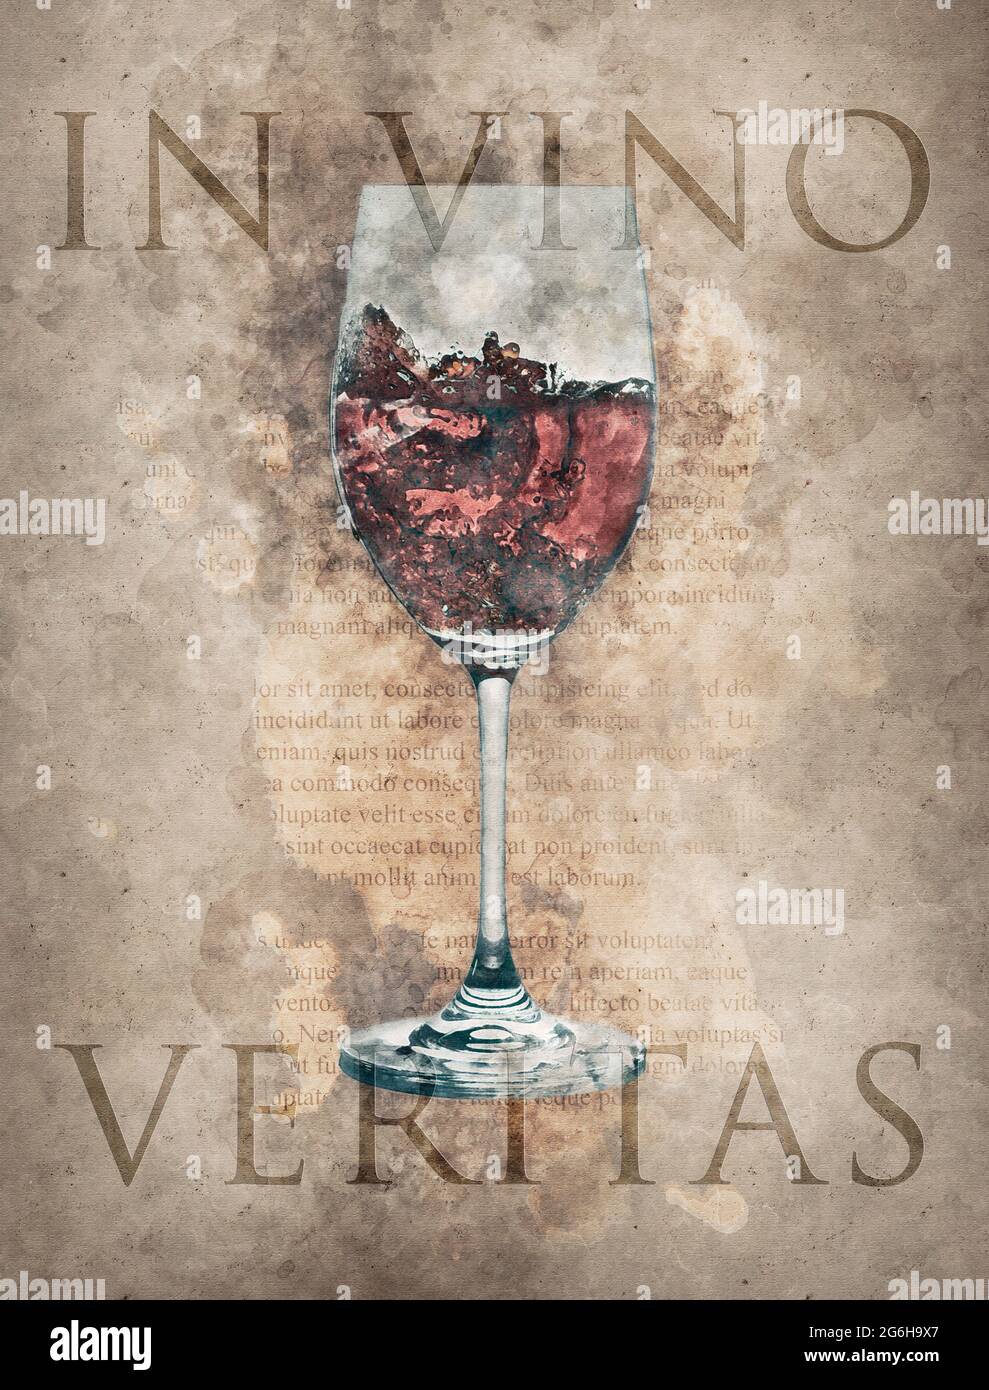 Concept image of a glass of red wine against a manuscript background with  Latin script and the legend 'In vino veritas' Stock Photo - Alamy